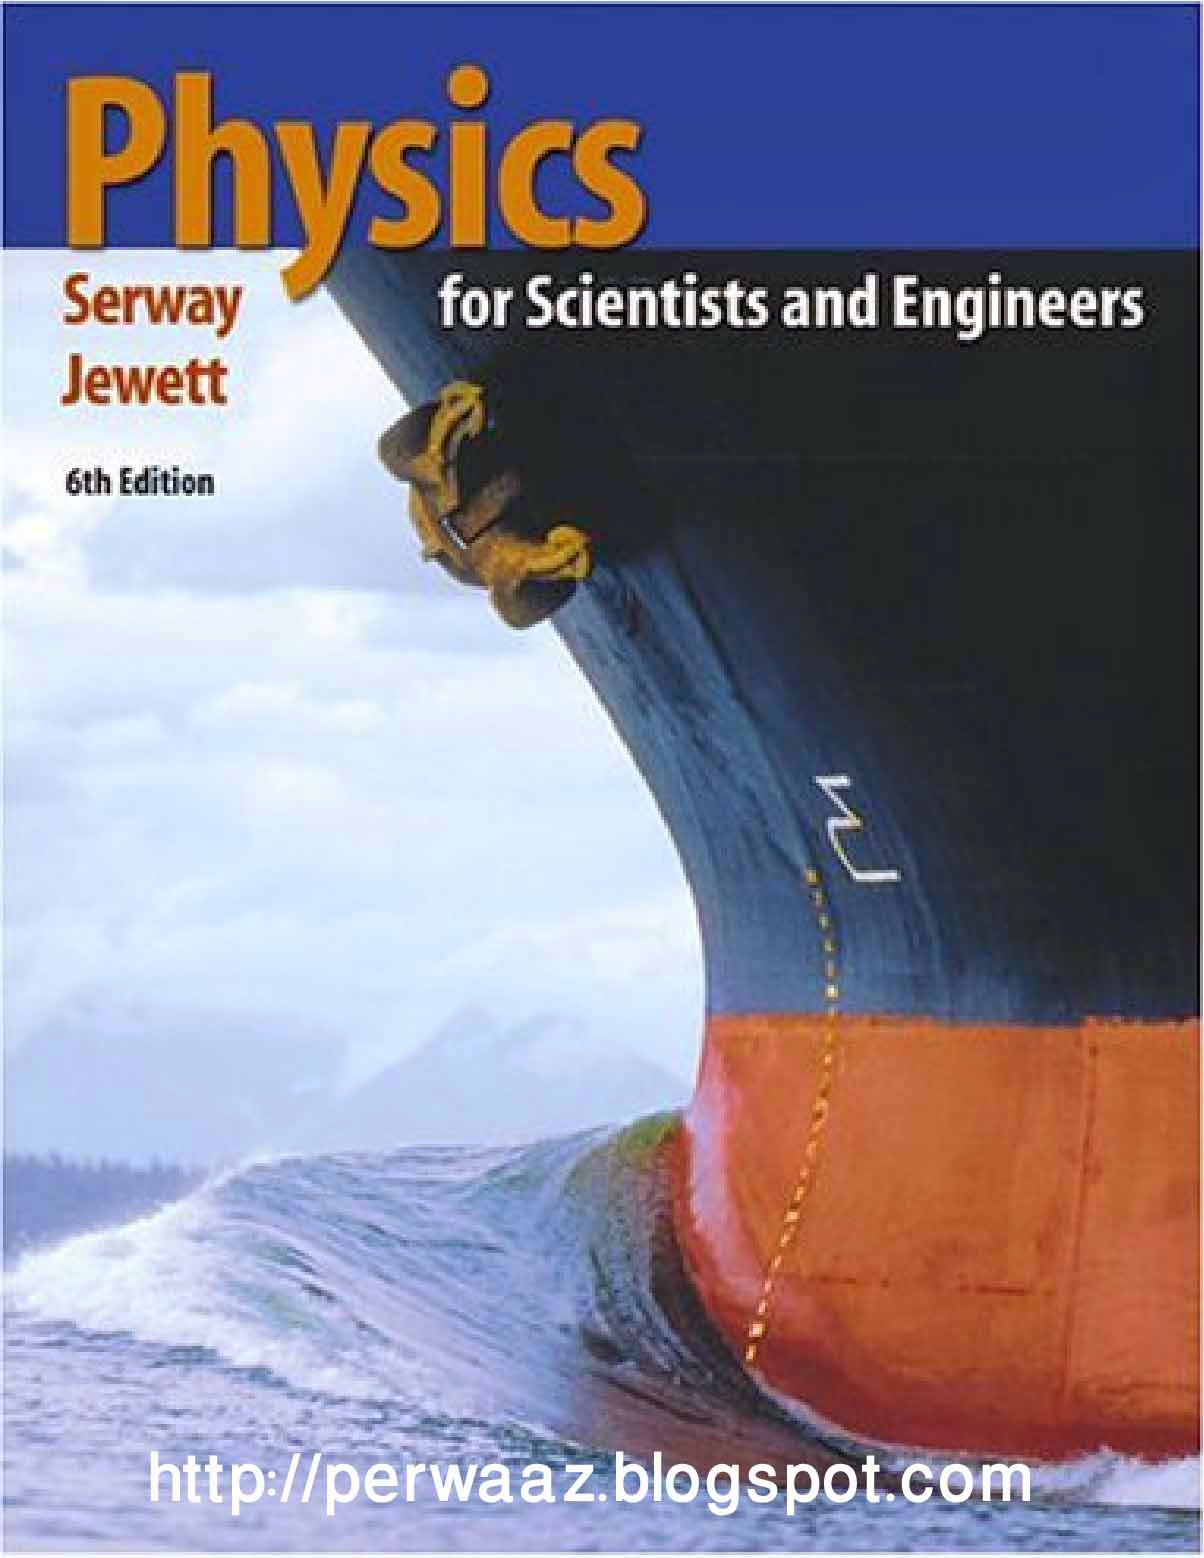 Physics for Scientists and Engineers 6th Edition by Serway, Jewett PDF